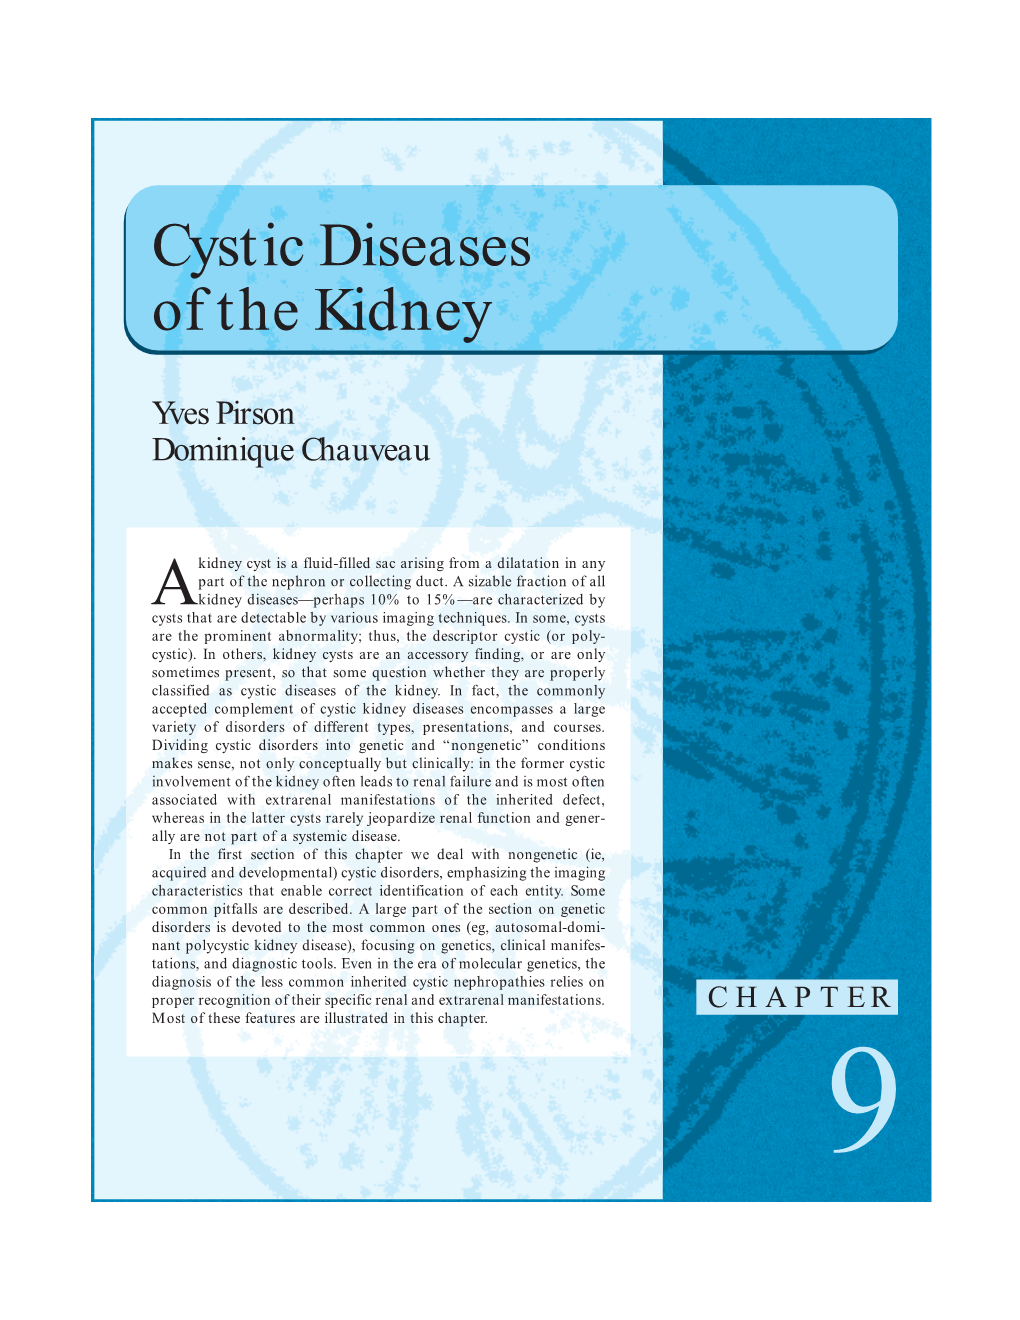 Cystic Diseases of the Kidney